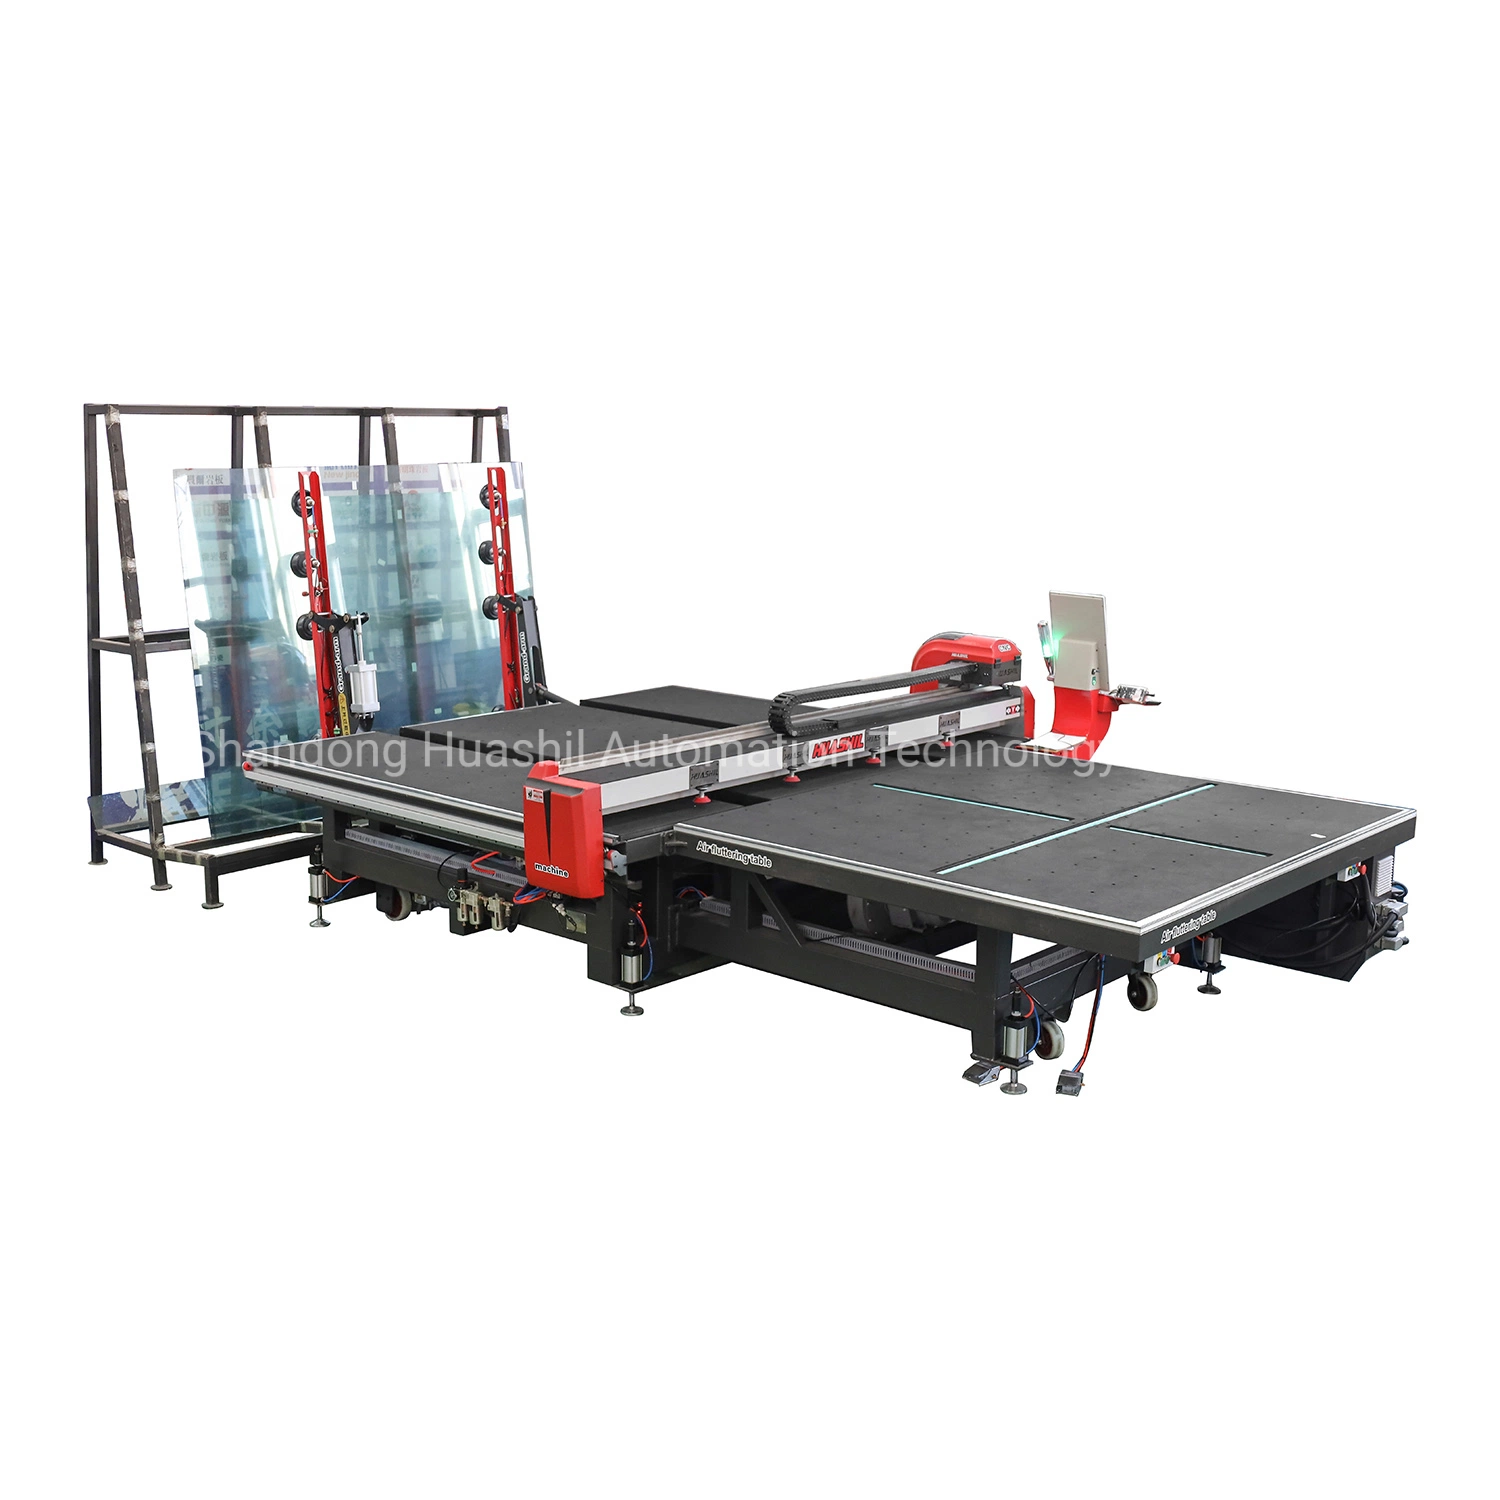 Hollow Float Glass Mirror CNC Automatic Loading and Cutting Machine